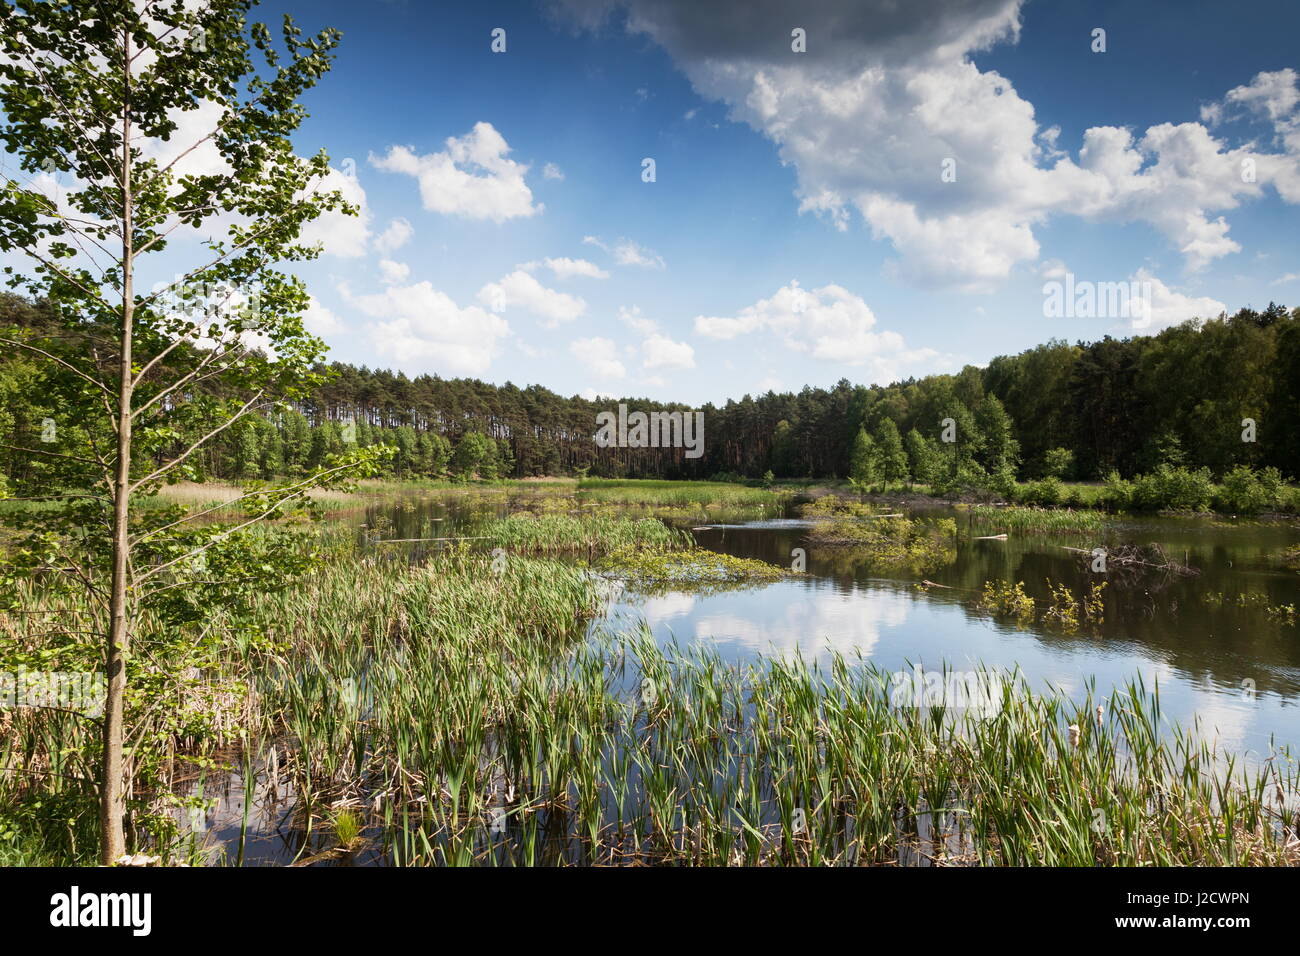 Wild Poland - A lake in the forest Stock Photo